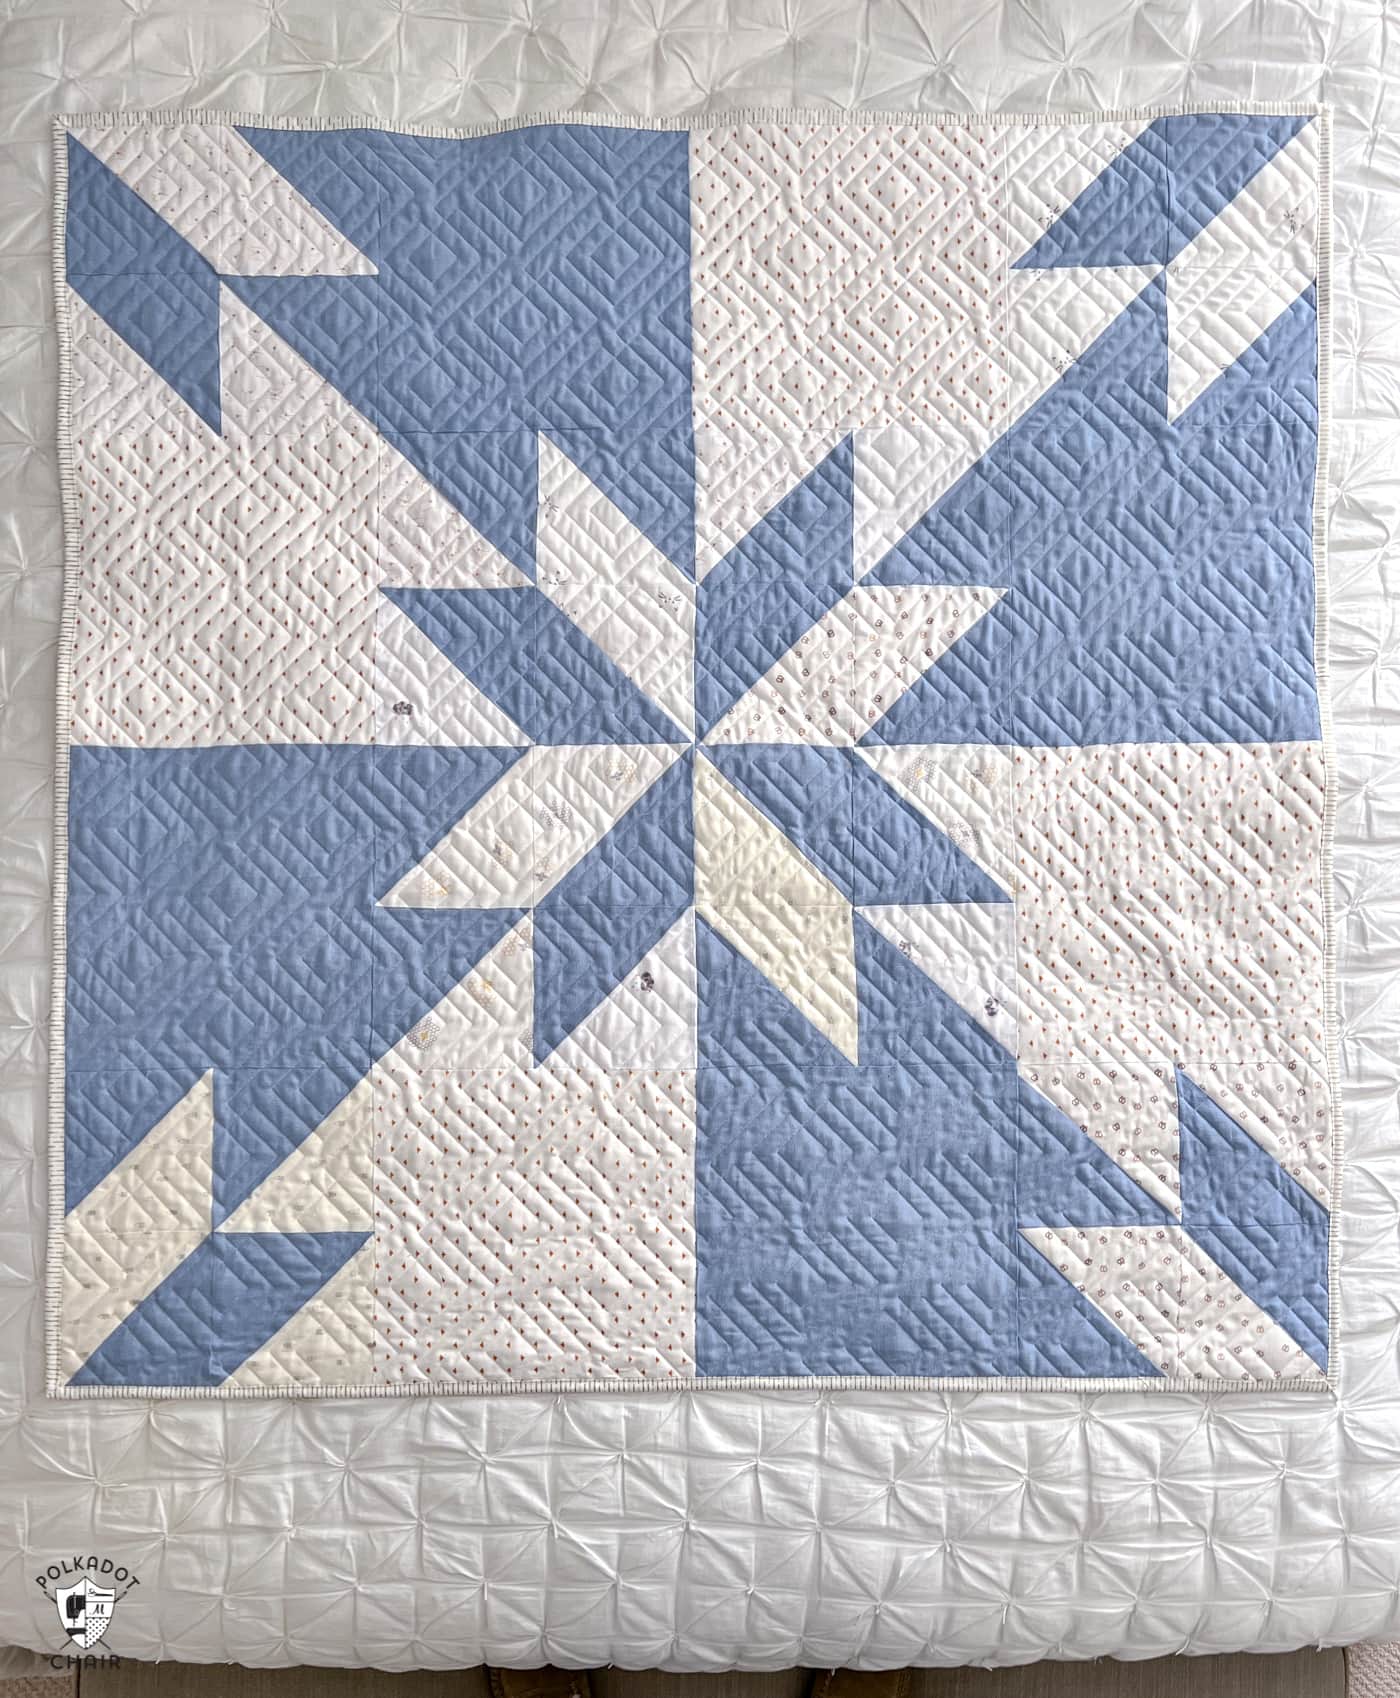 blue and white star baby quilt on bed